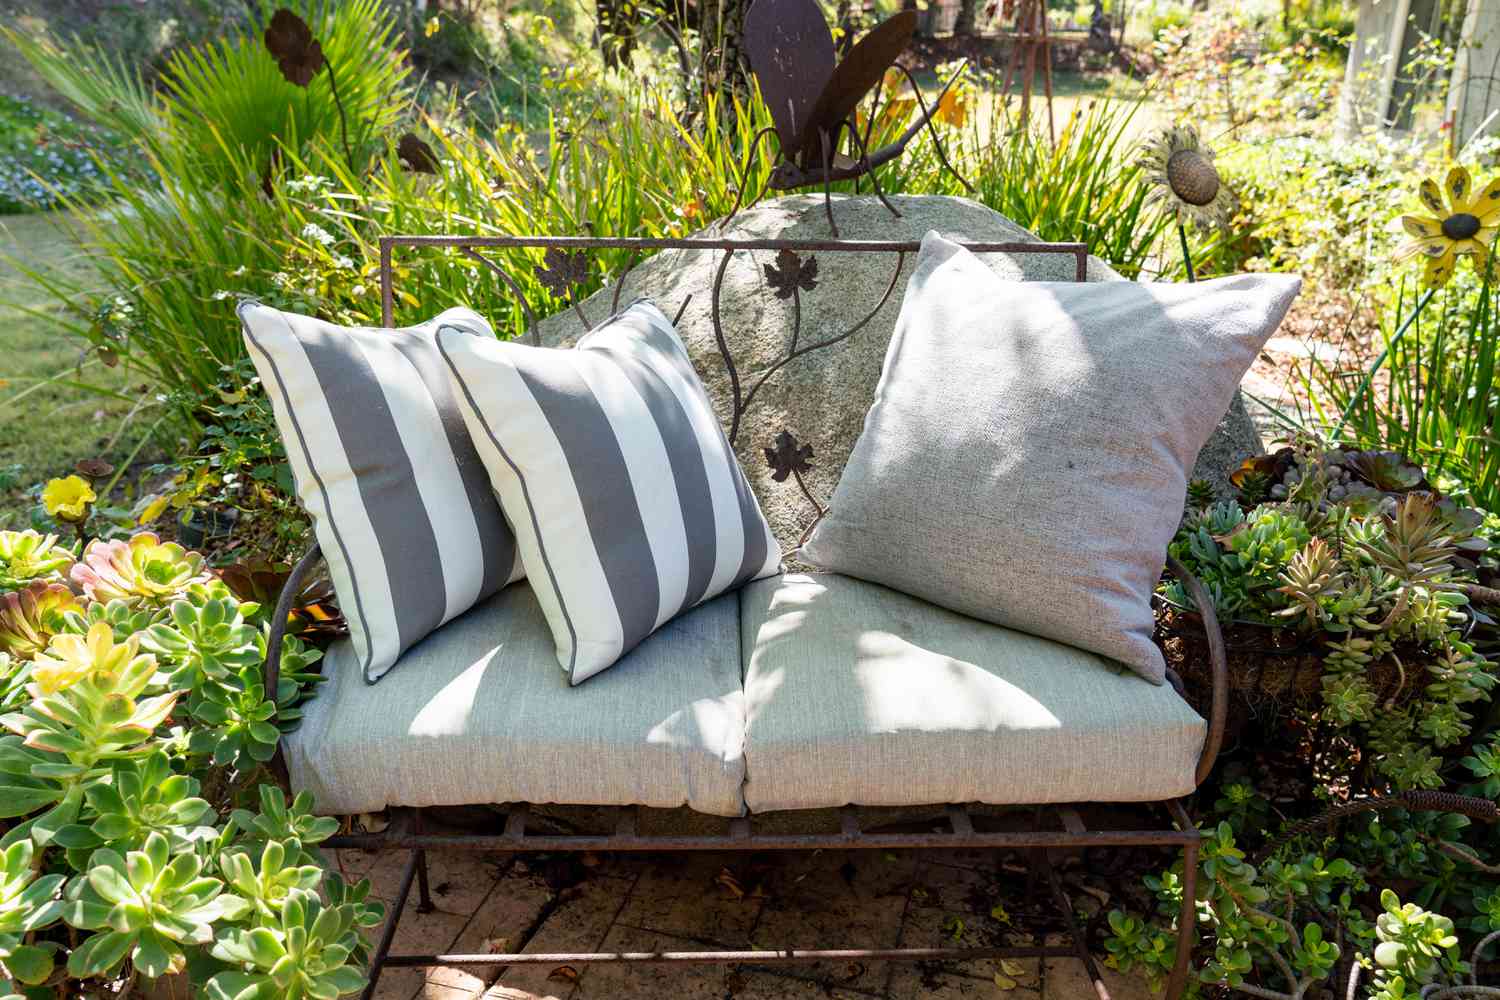 Can you use bleach on white outdoor cushions?